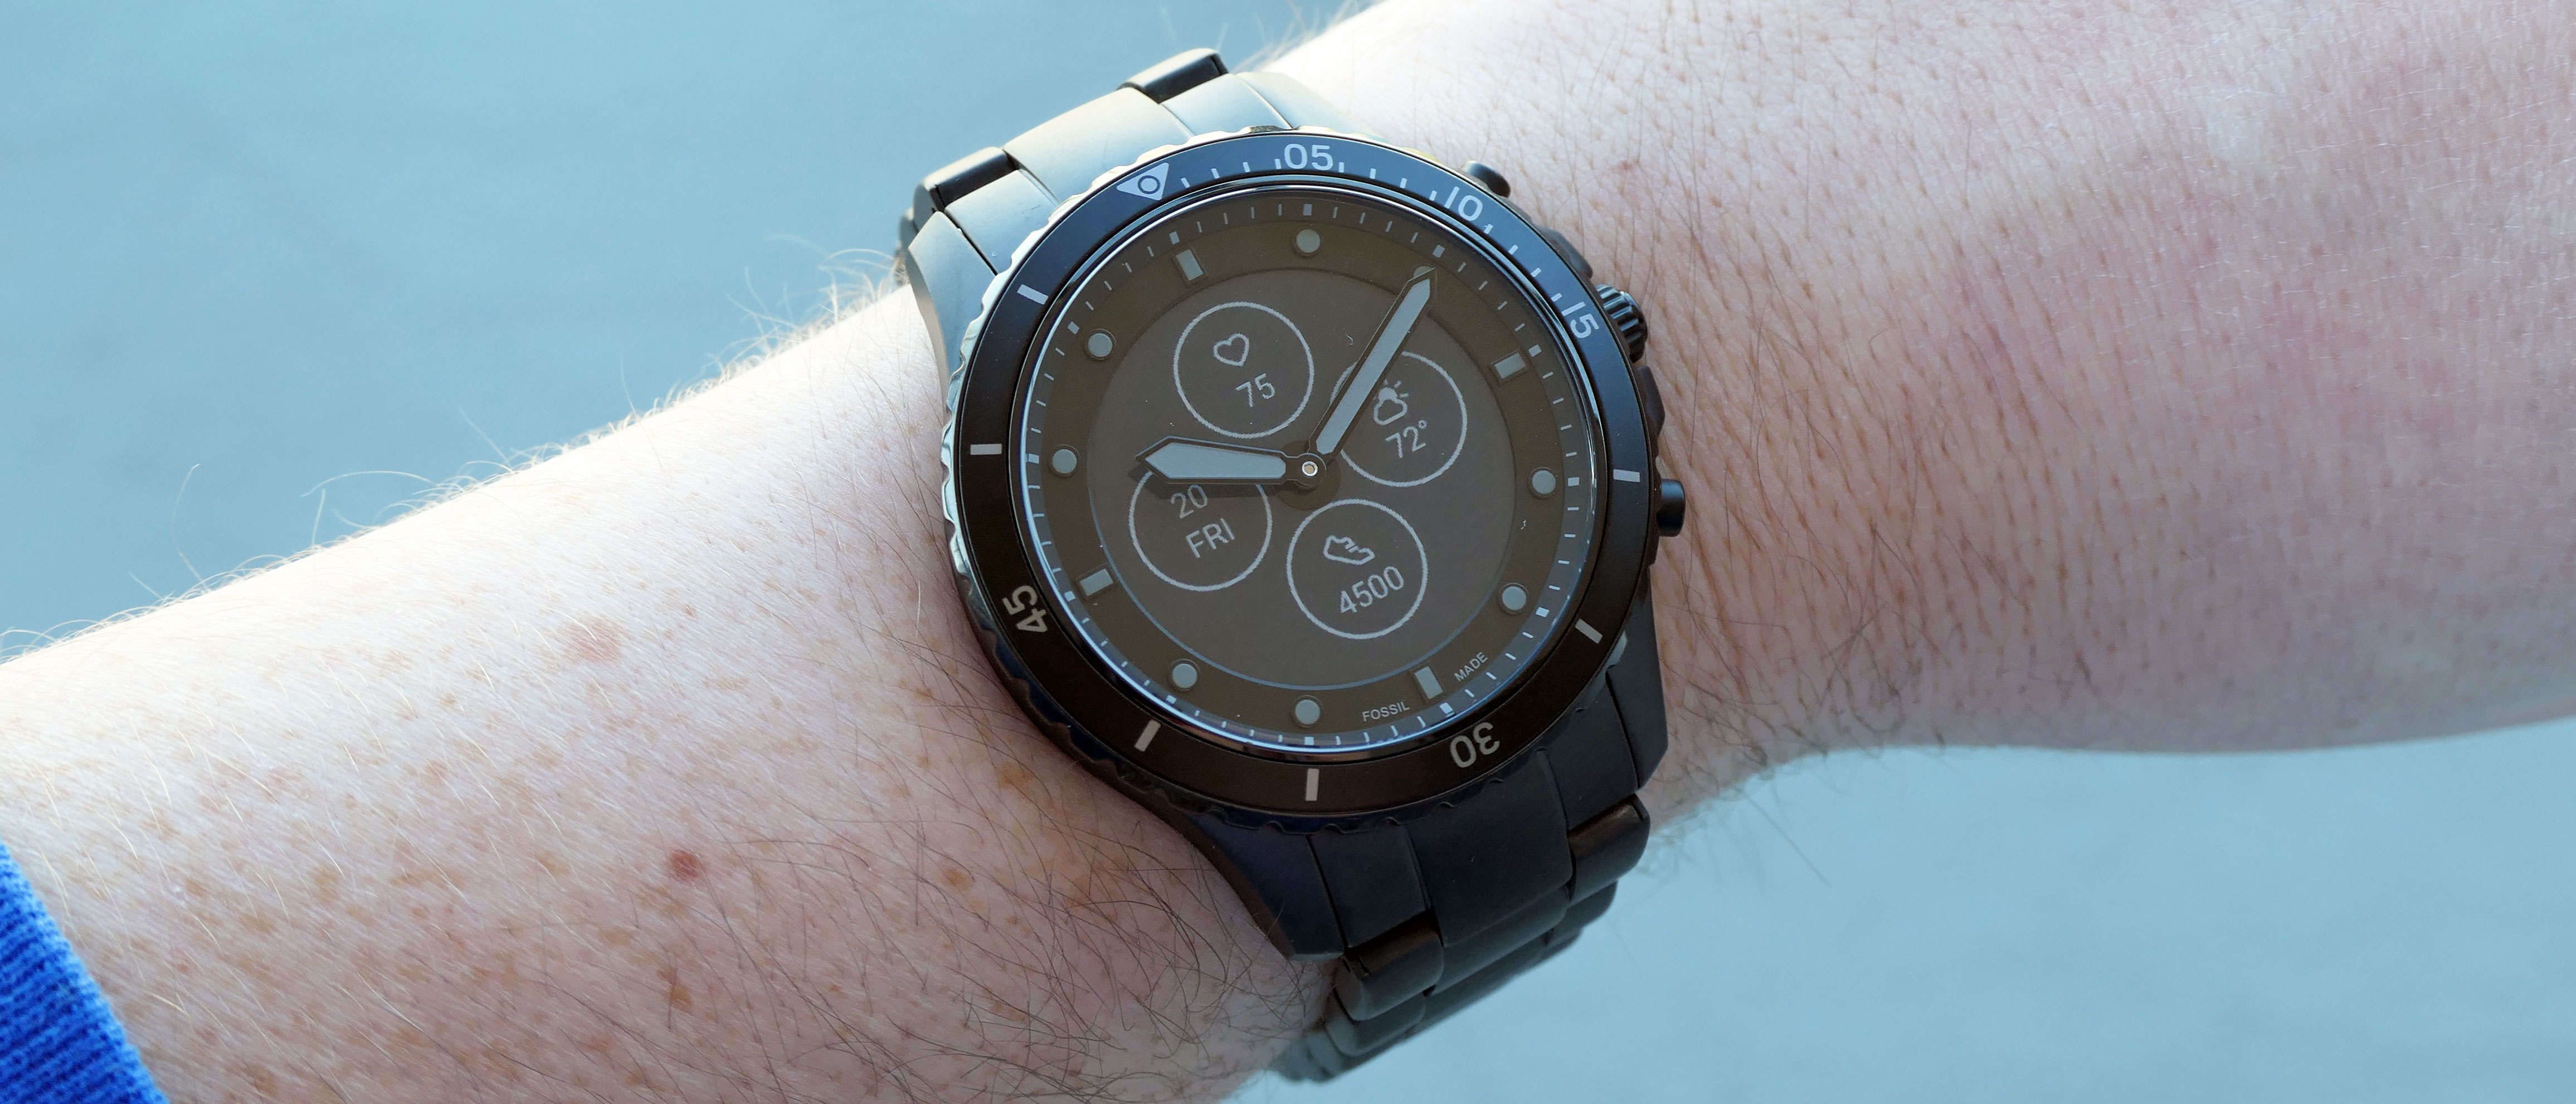 fossil q nate smartwatch review